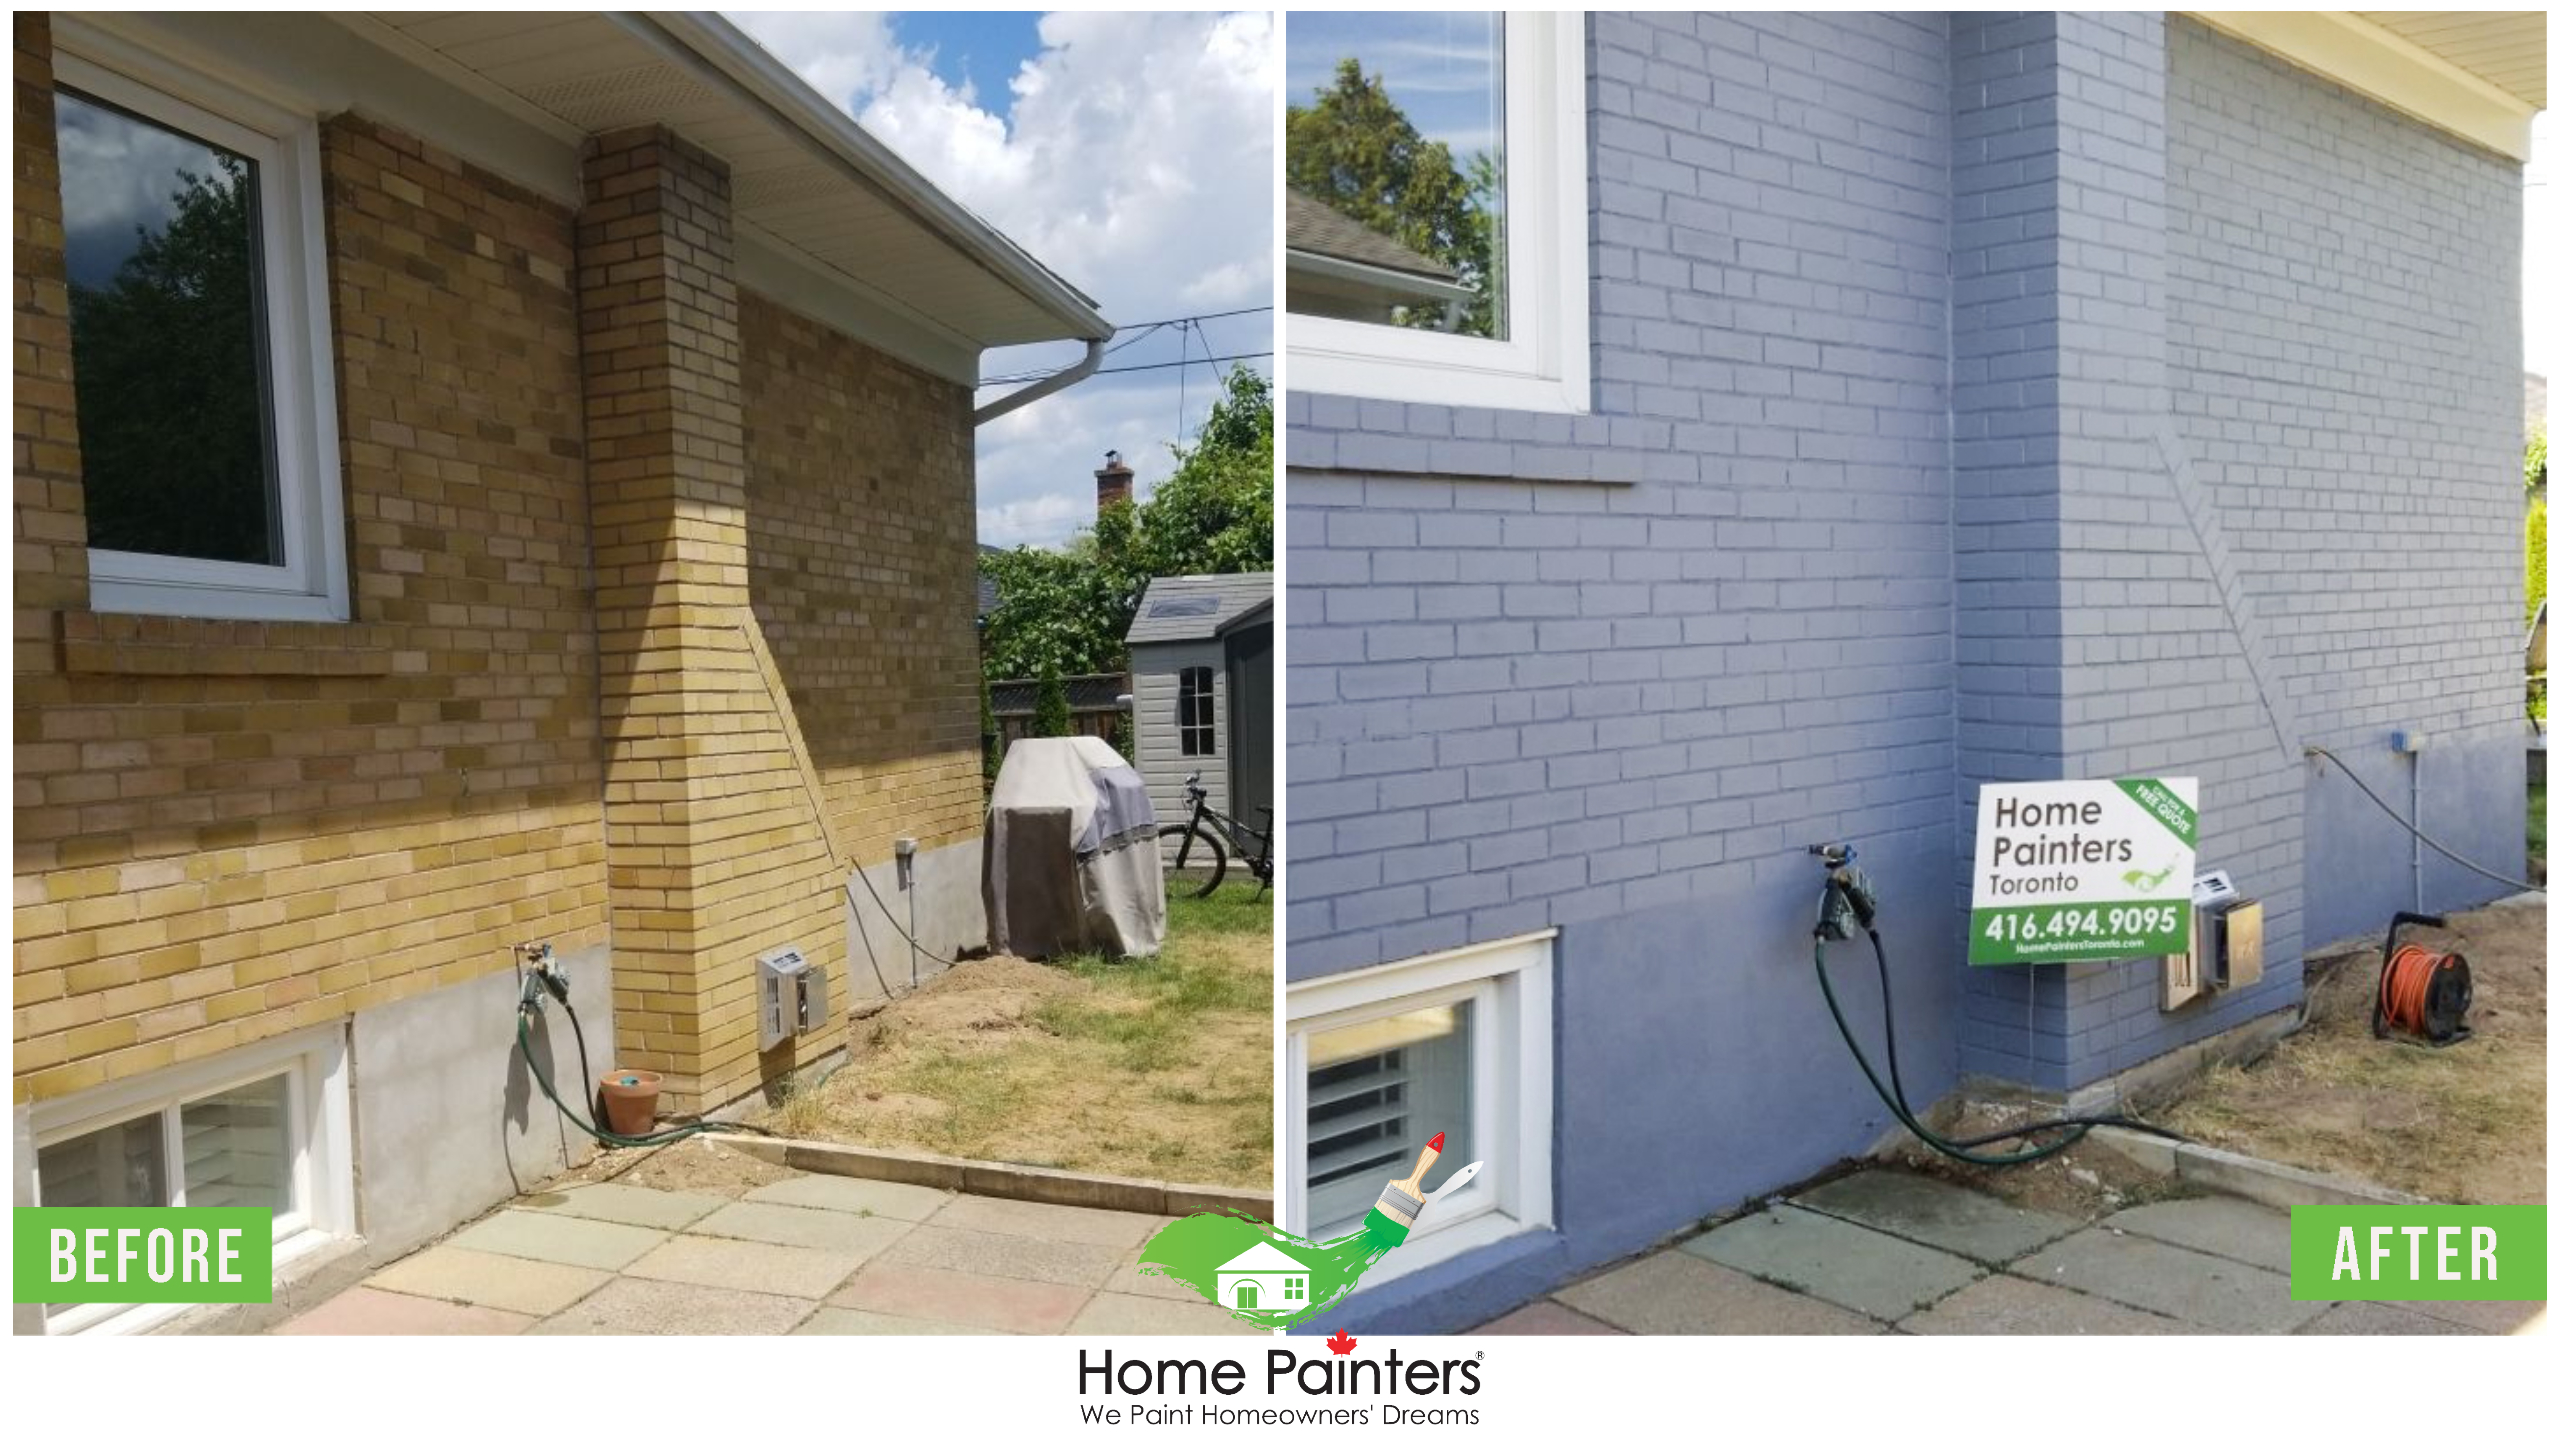 Best transformation of a brick stained home, from a red brick to modern dark gray colour, made by Home Painters toronto